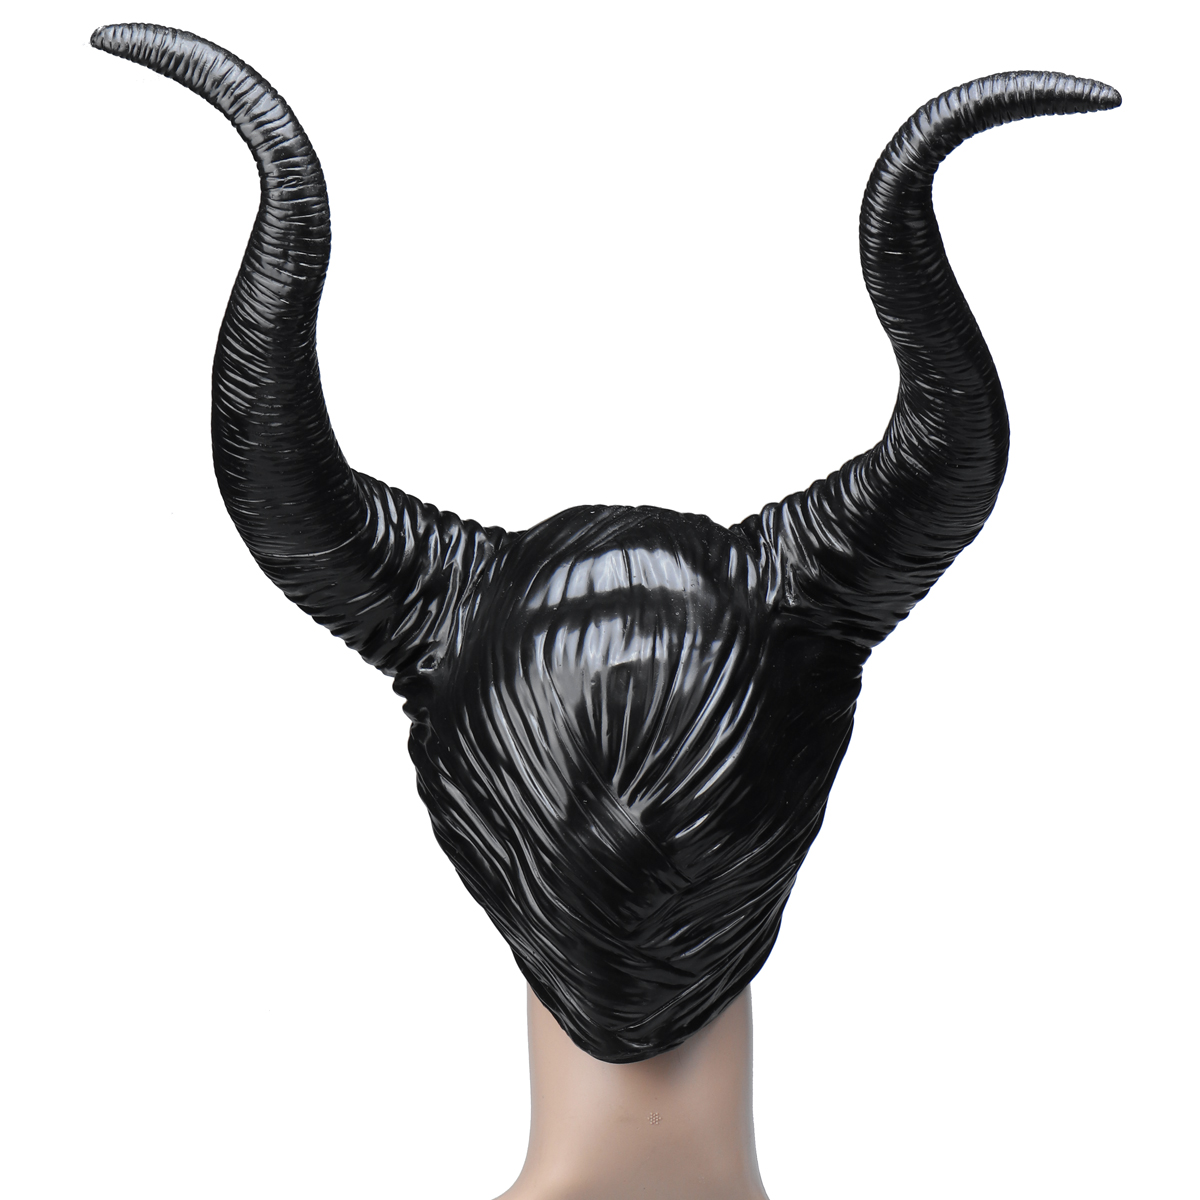 Black-Horns-Halloween-Party-Costume-Witch-Headgear-Cosplay-1347613